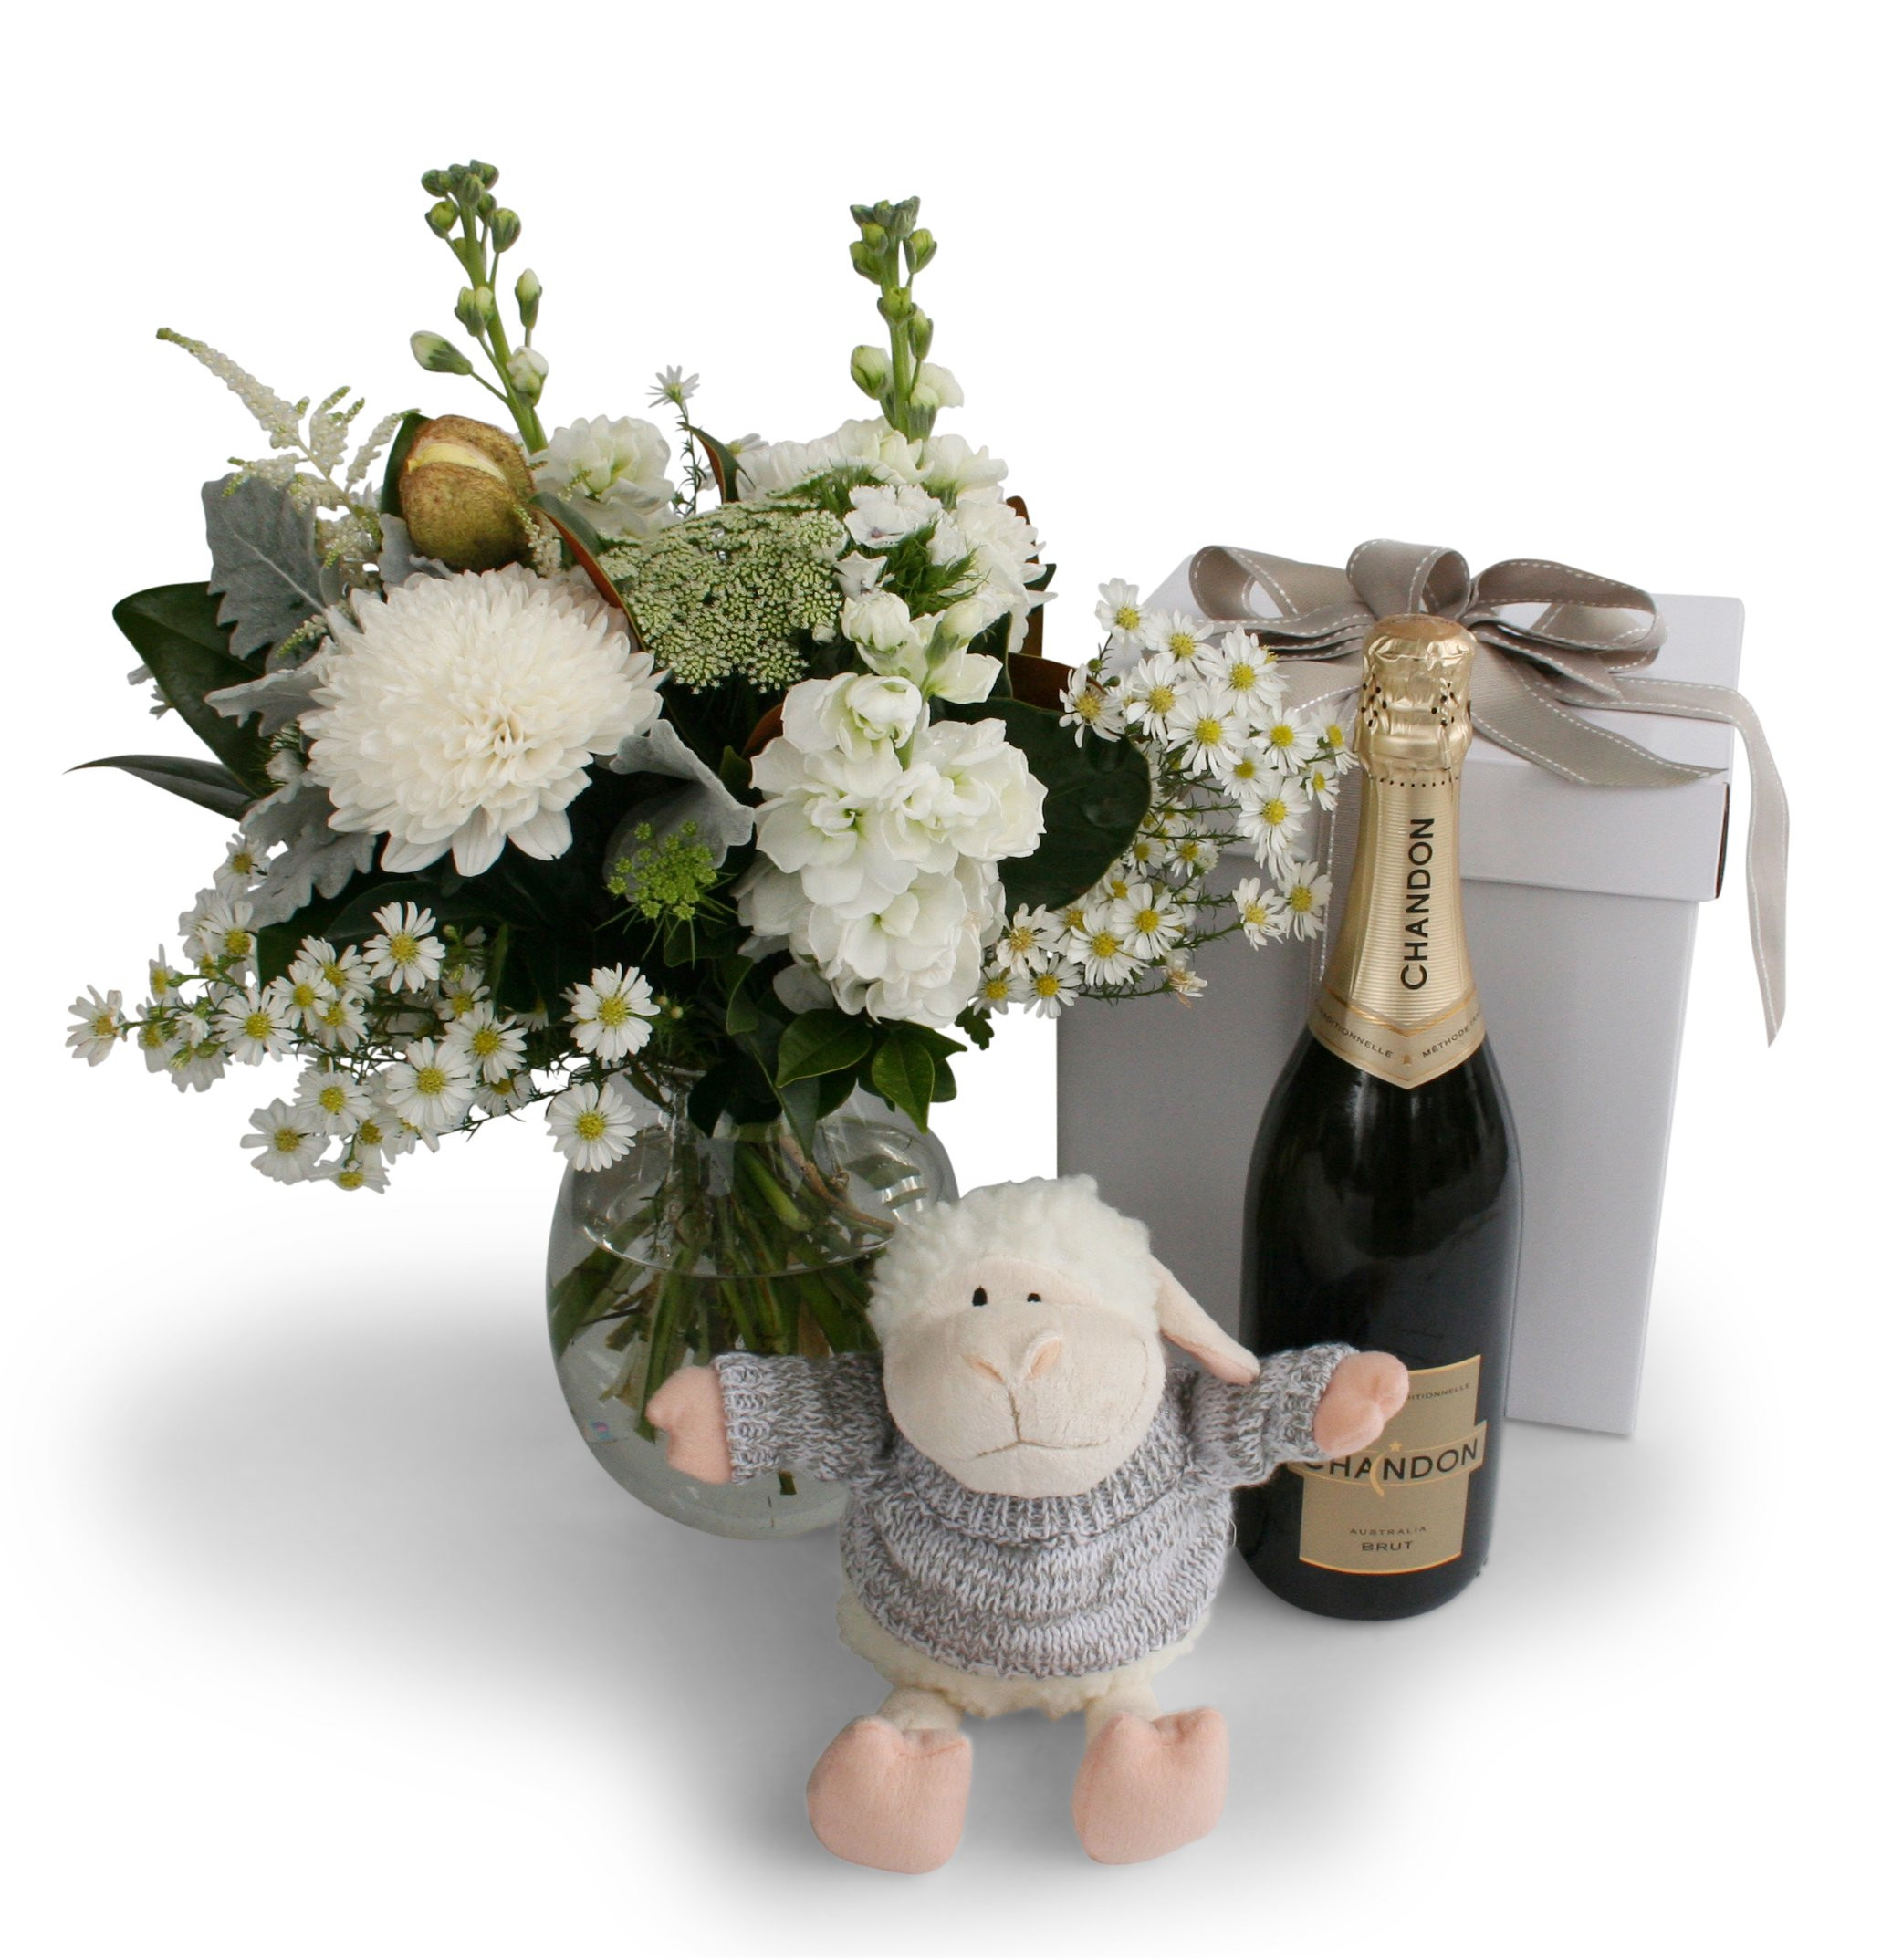 30 attractive White Flower Vases for Sale 2022 free download white flower vases for sale of new born hampers baby gifts delivery divine flowers brisbane intended for a vase design of fresh seasonal all white flowers a super soft lamb toy and